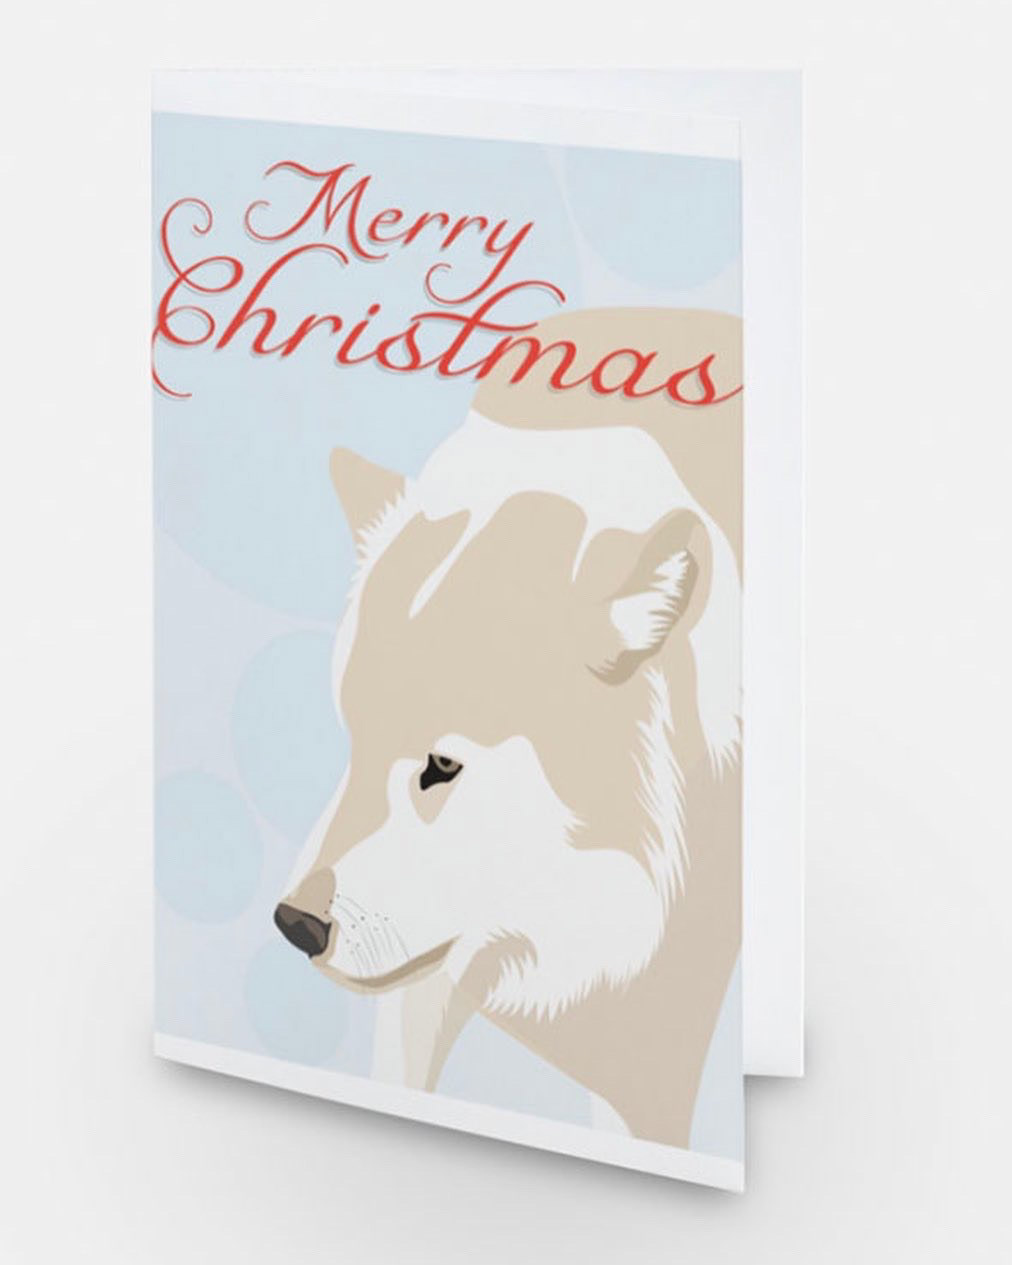 cards Christmas design illustrated